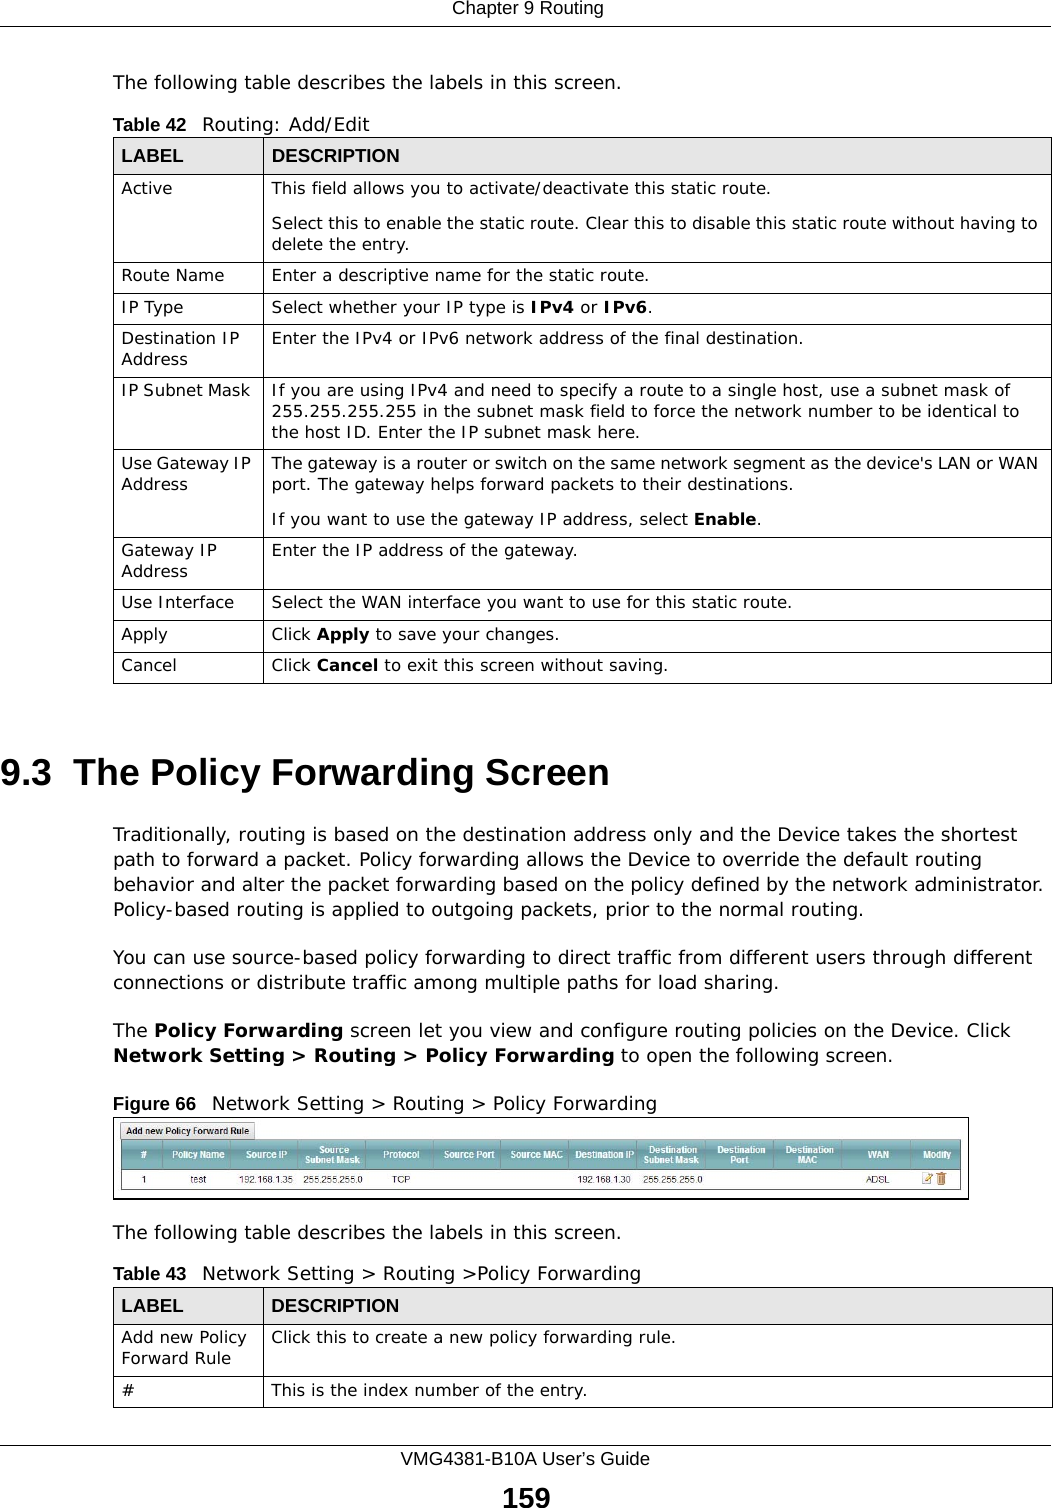  Chapter 9 RoutingVMG4381-B10A User’s Guide159The following table describes the labels in this screen. 9.3  The Policy Forwarding ScreenTraditionally, routing is based on the destination address only and the Device takes the shortest path to forward a packet. Policy forwarding allows the Device to override the default routing behavior and alter the packet forwarding based on the policy defined by the network administrator. Policy-based routing is applied to outgoing packets, prior to the normal routing.You can use source-based policy forwarding to direct traffic from different users through different connections or distribute traffic among multiple paths for load sharing.The Policy Forwarding screen let you view and configure routing policies on the Device. Click Network Setting &gt; Routing &gt; Policy Forwarding to open the following screen.Figure 66   Network Setting &gt; Routing &gt; Policy ForwardingThe following table describes the labels in this screen. Table 42   Routing: Add/EditLABEL DESCRIPTIONActive This field allows you to activate/deactivate this static route.Select this to enable the static route. Clear this to disable this static route without having to delete the entry.Route Name Enter a descriptive name for the static route.IP Type Select whether your IP type is IPv4 or IPv6. Destination IP Address Enter the IPv4 or IPv6 network address of the final destination. IP Subnet Mask  If you are using IPv4 and need to specify a route to a single host, use a subnet mask of 255.255.255.255 in the subnet mask field to force the network number to be identical to the host ID. Enter the IP subnet mask here.Use Gateway IP Address  The gateway is a router or switch on the same network segment as the device&apos;s LAN or WAN port. The gateway helps forward packets to their destinations.If you want to use the gateway IP address, select Enable.Gateway IP Address Enter the IP address of the gateway. Use Interface Select the WAN interface you want to use for this static route.Apply Click Apply to save your changes.Cancel Click Cancel to exit this screen without saving.Table 43   Network Setting &gt; Routing &gt;Policy ForwardingLABEL DESCRIPTIONAdd new Policy Forward Rule Click this to create a new policy forwarding rule.#This is the index number of the entry.